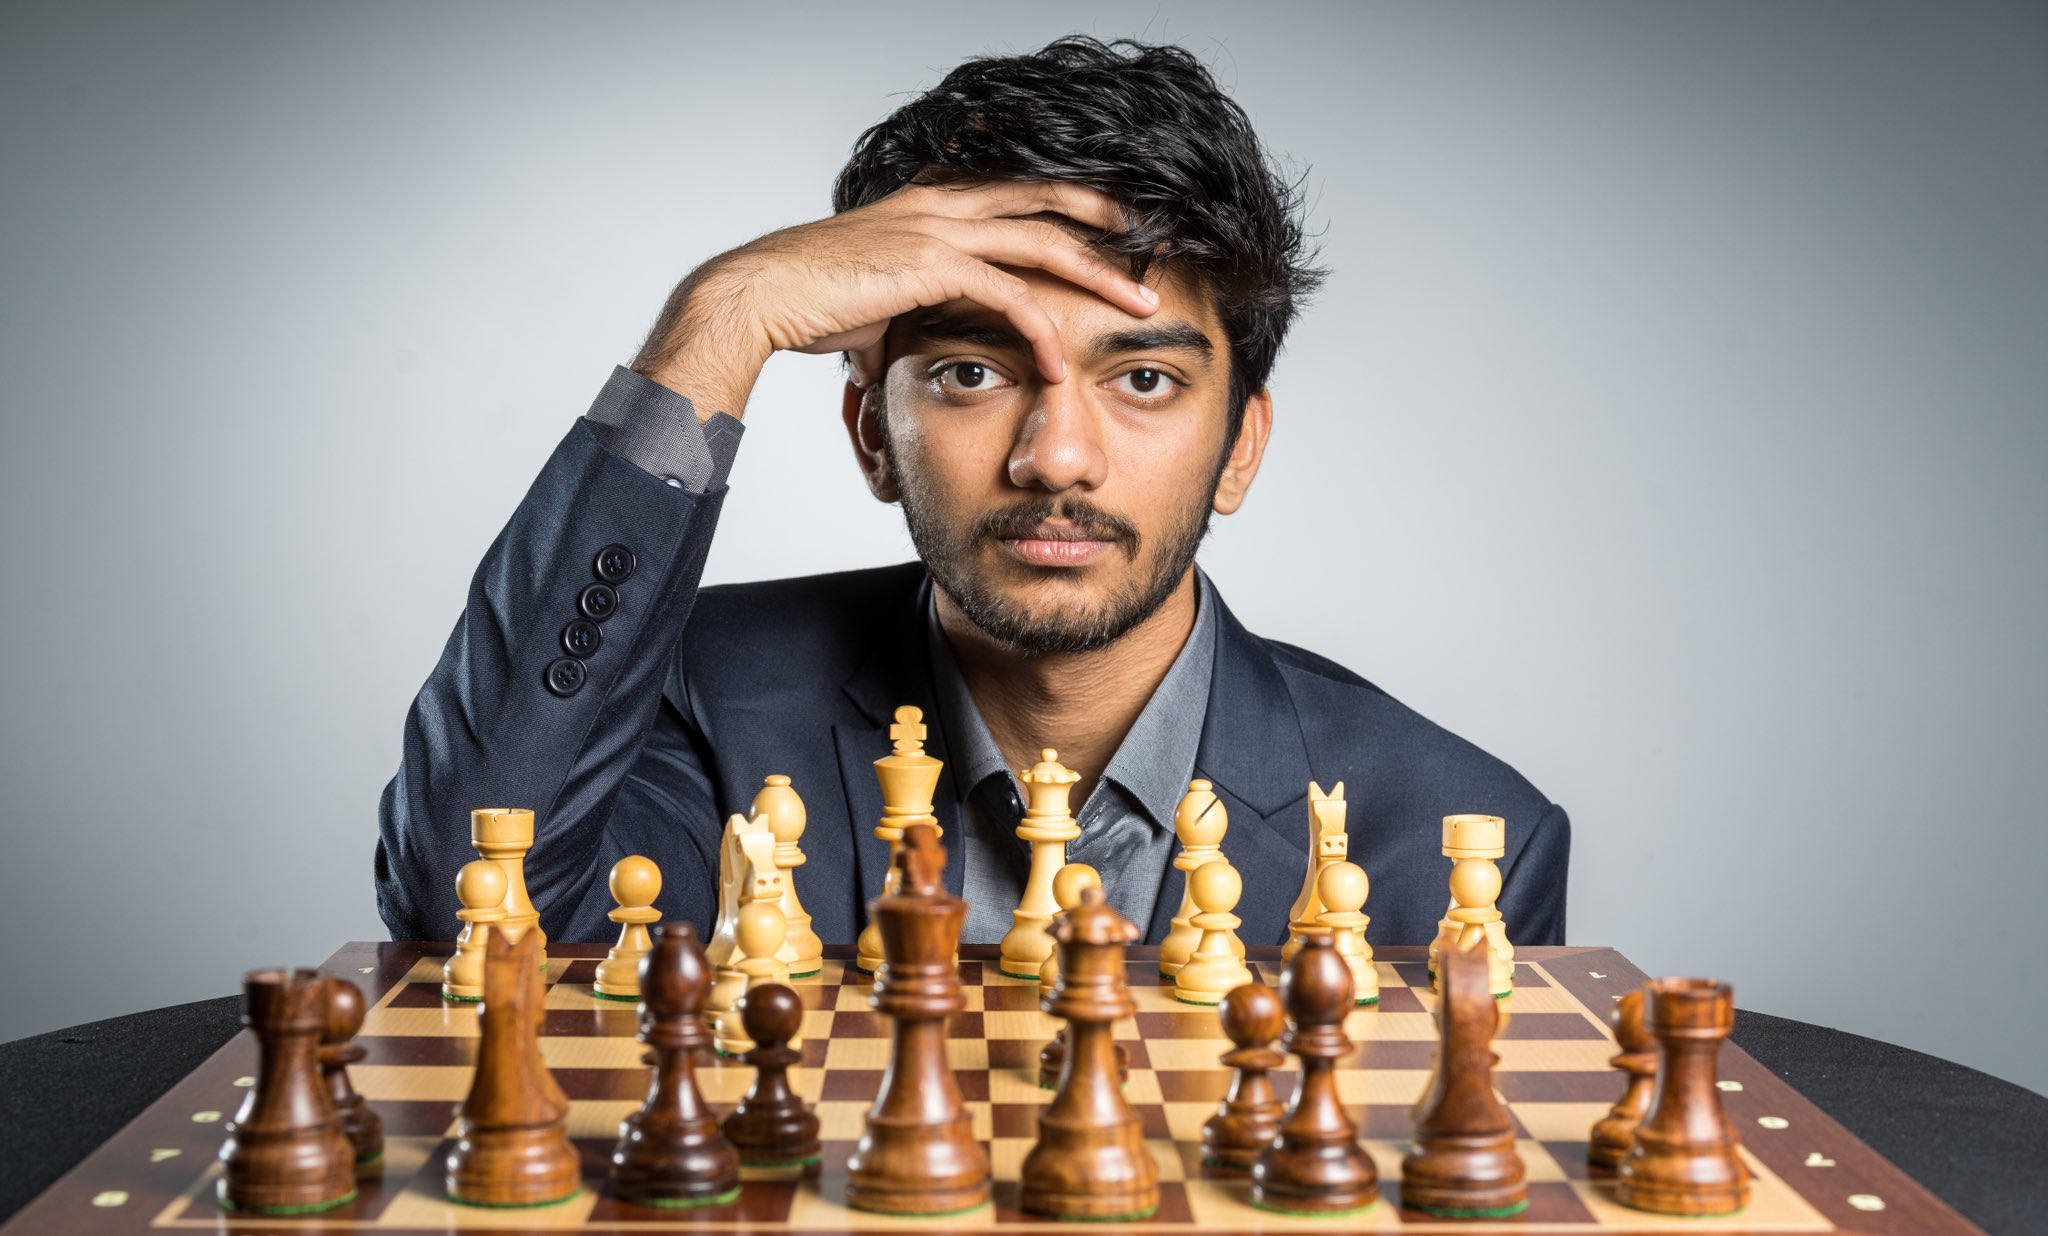 Huge congratulations to D Gukesh for defeating the World #1 Magnus